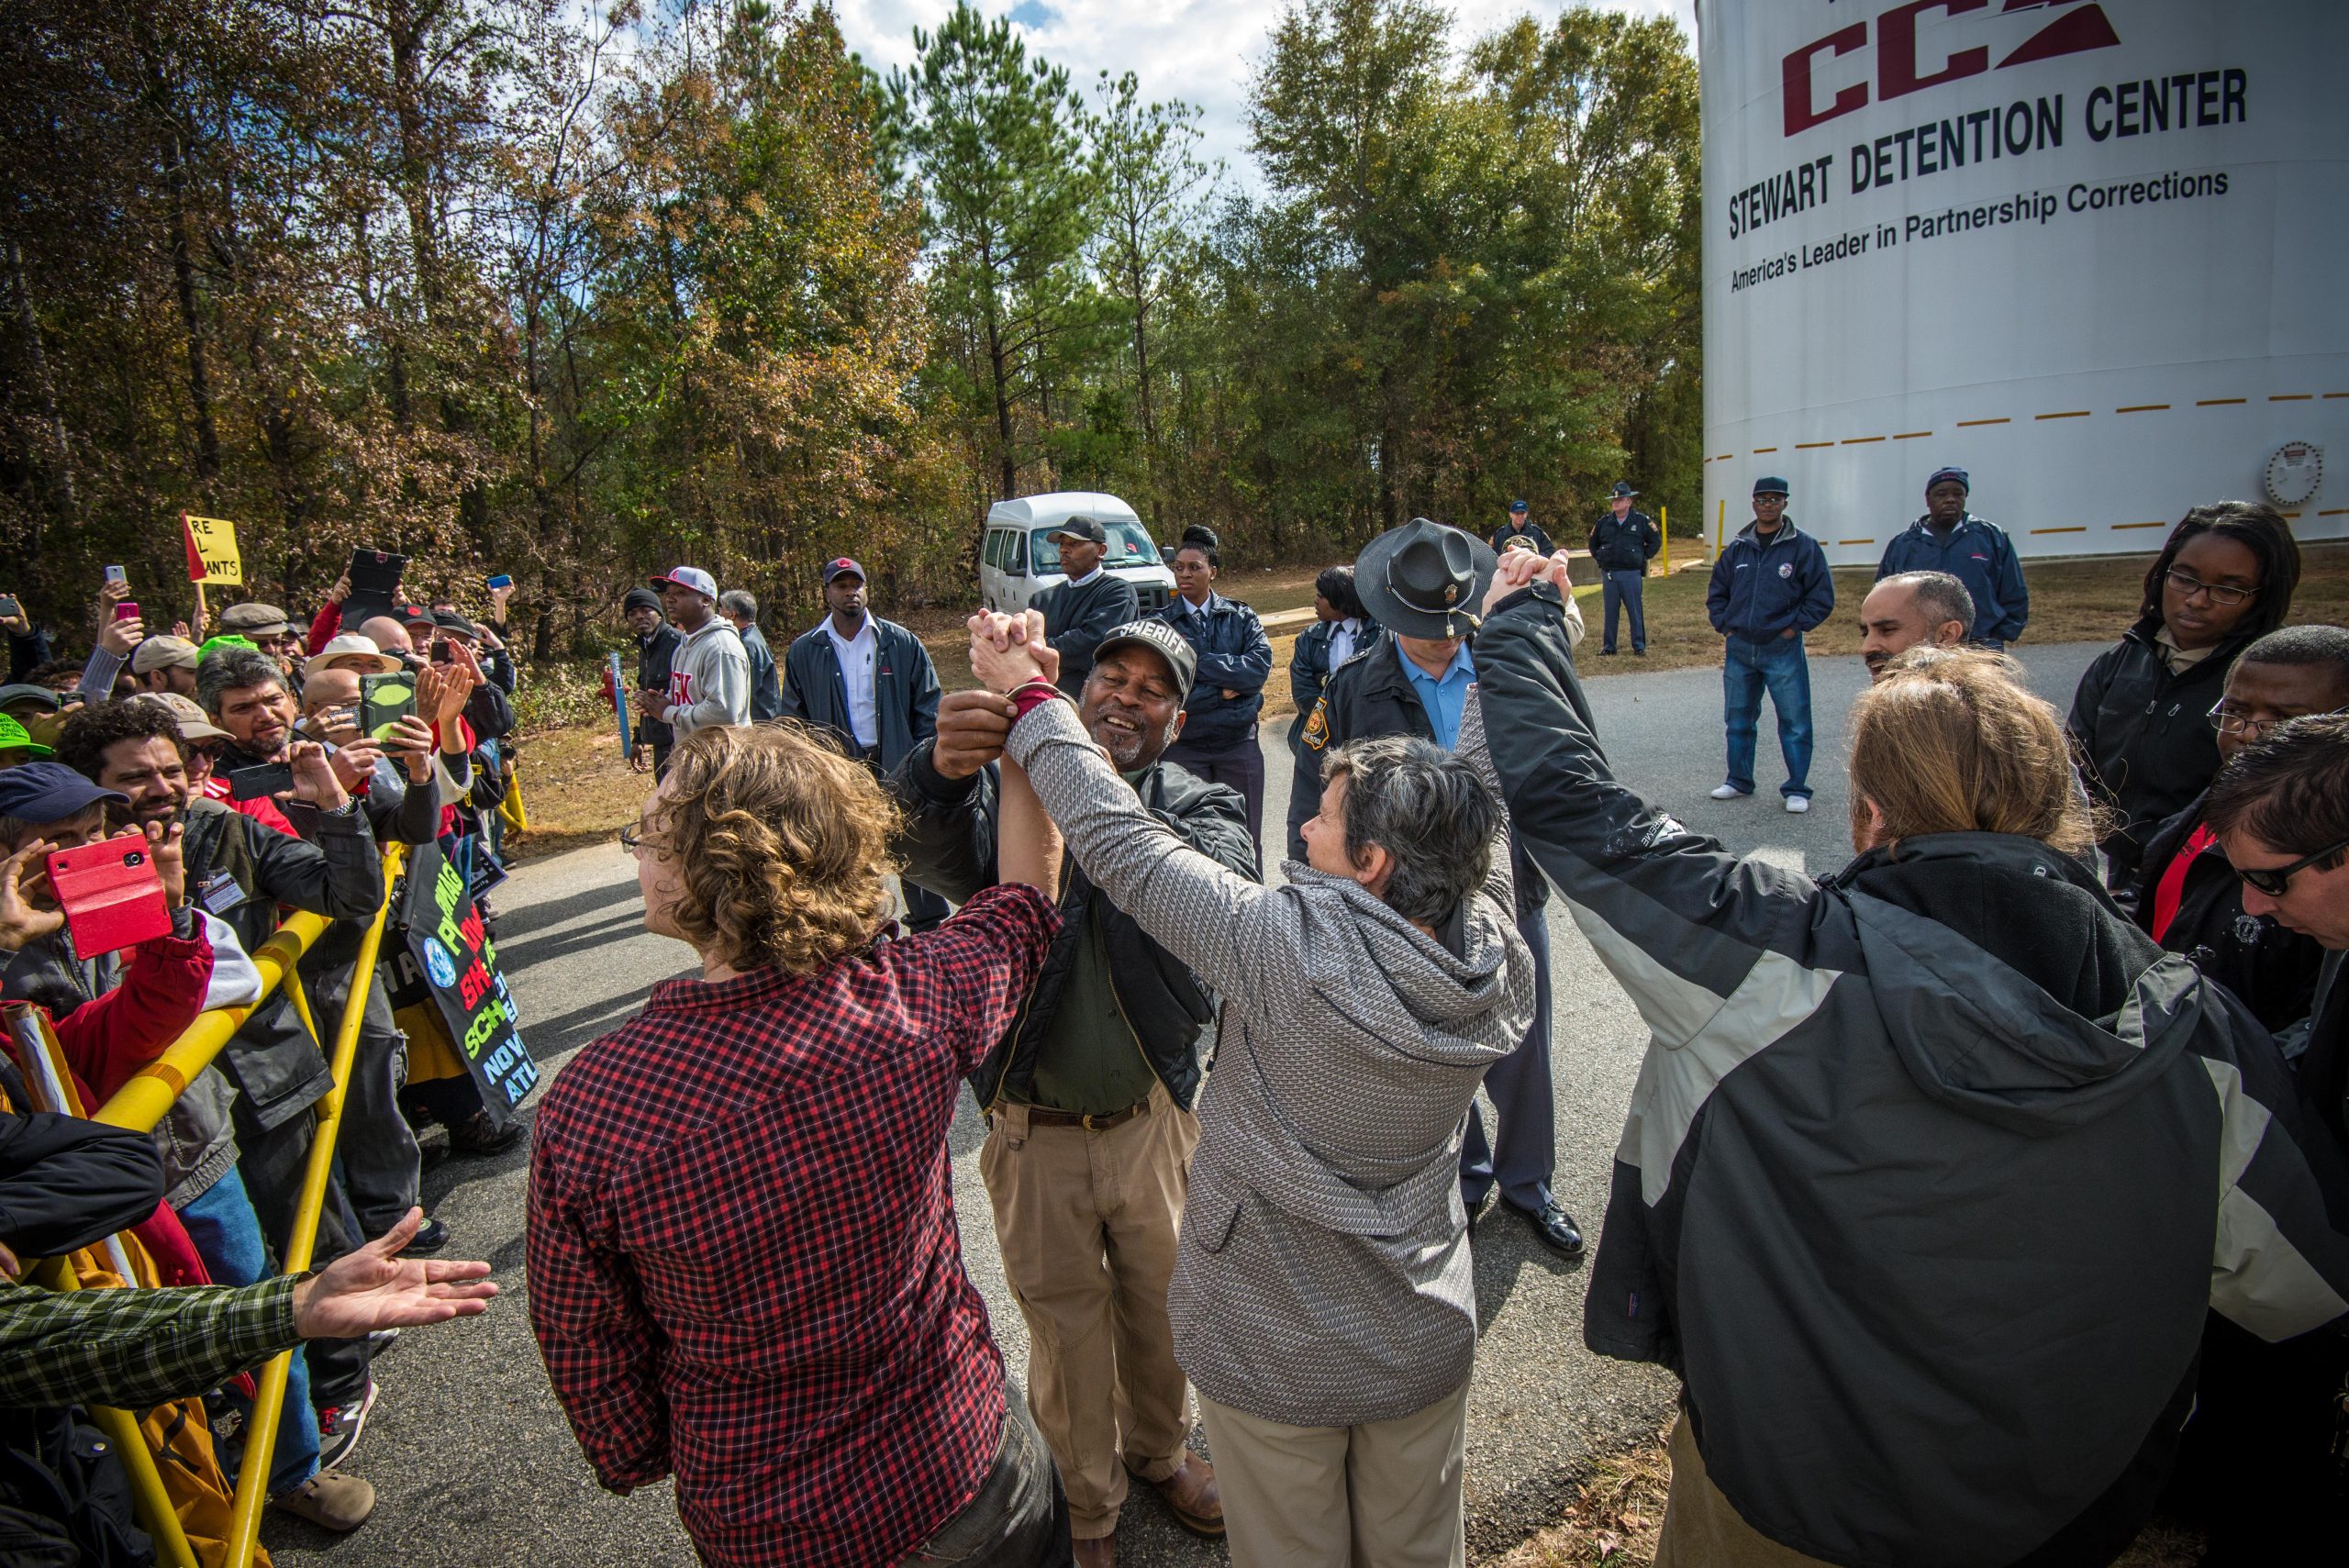 The “Stewart Five” raising their hands and singing We Shall Overcome as they are handcuffed and arrested for civil disobedience at Stewart Detention Center in Lumpkin, Ga., acting on their consciences for migrant justice.